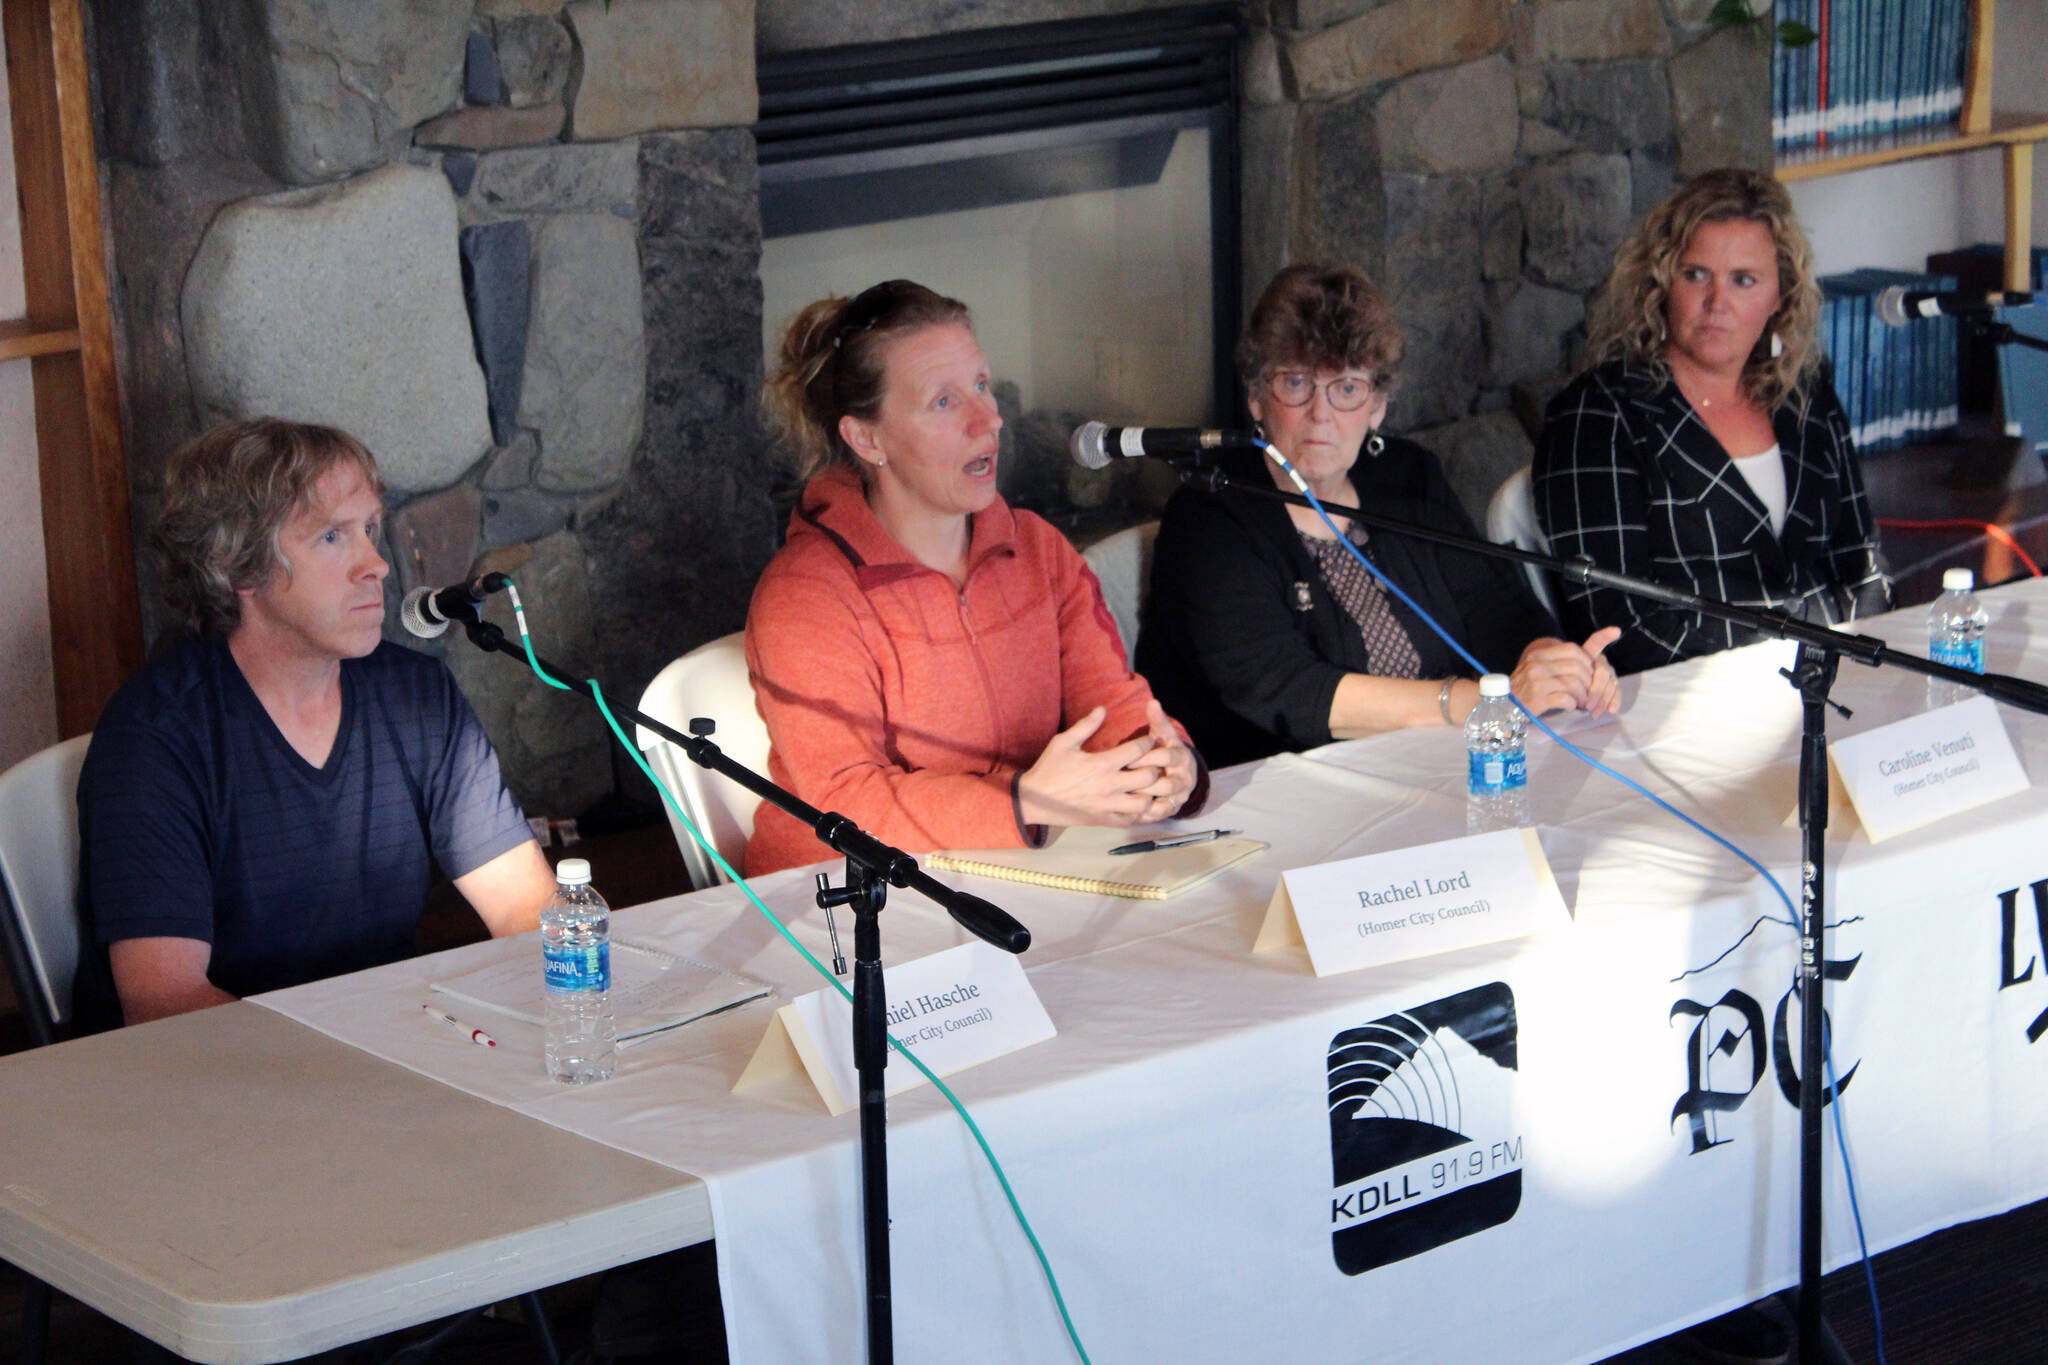 Daniel Hasche, Rachel Lord, Caroline Venuti and Joni Wise participate in a Homer City Council Candidate Forum at Homer Public Library in Homer, Alaska, on Monday, Sept. 18, 2023. (Jake Dye/Peninsula Clarion)